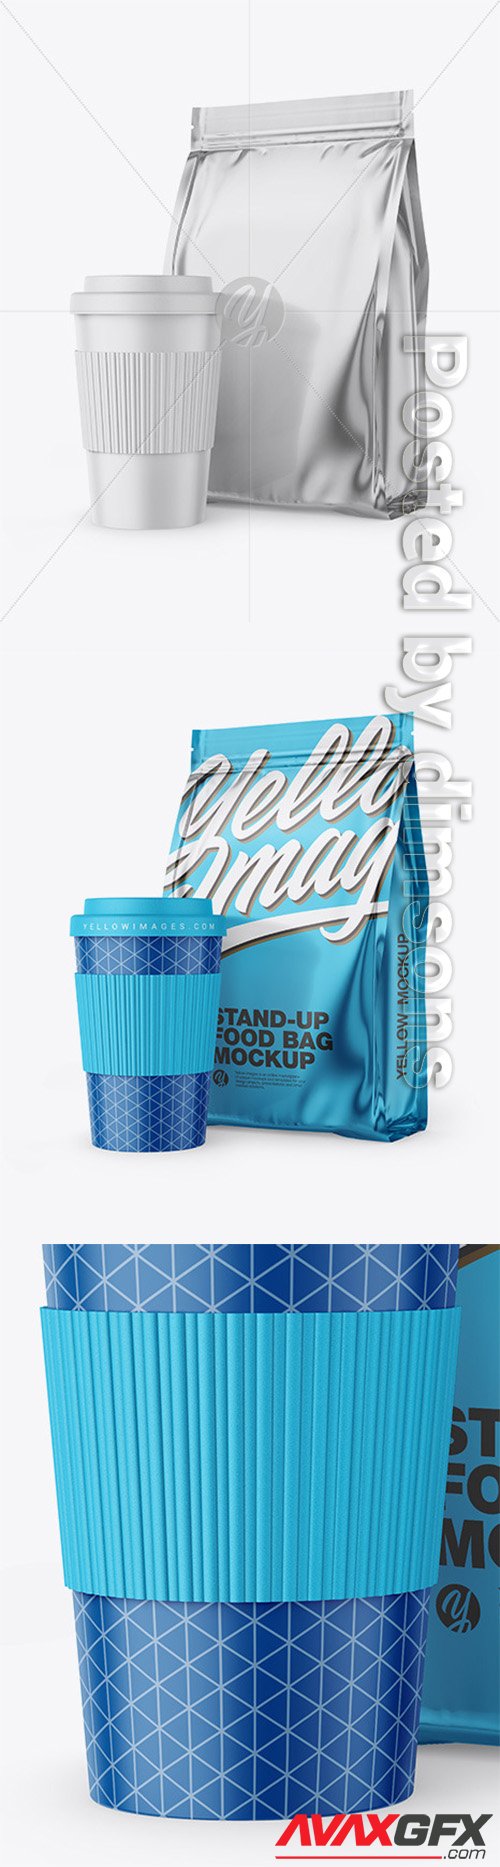 Download Matte Stand-Up Bag with Coffee Mug Mockup 66582 » AVAXGFX - All Downloads that You Need in One ...